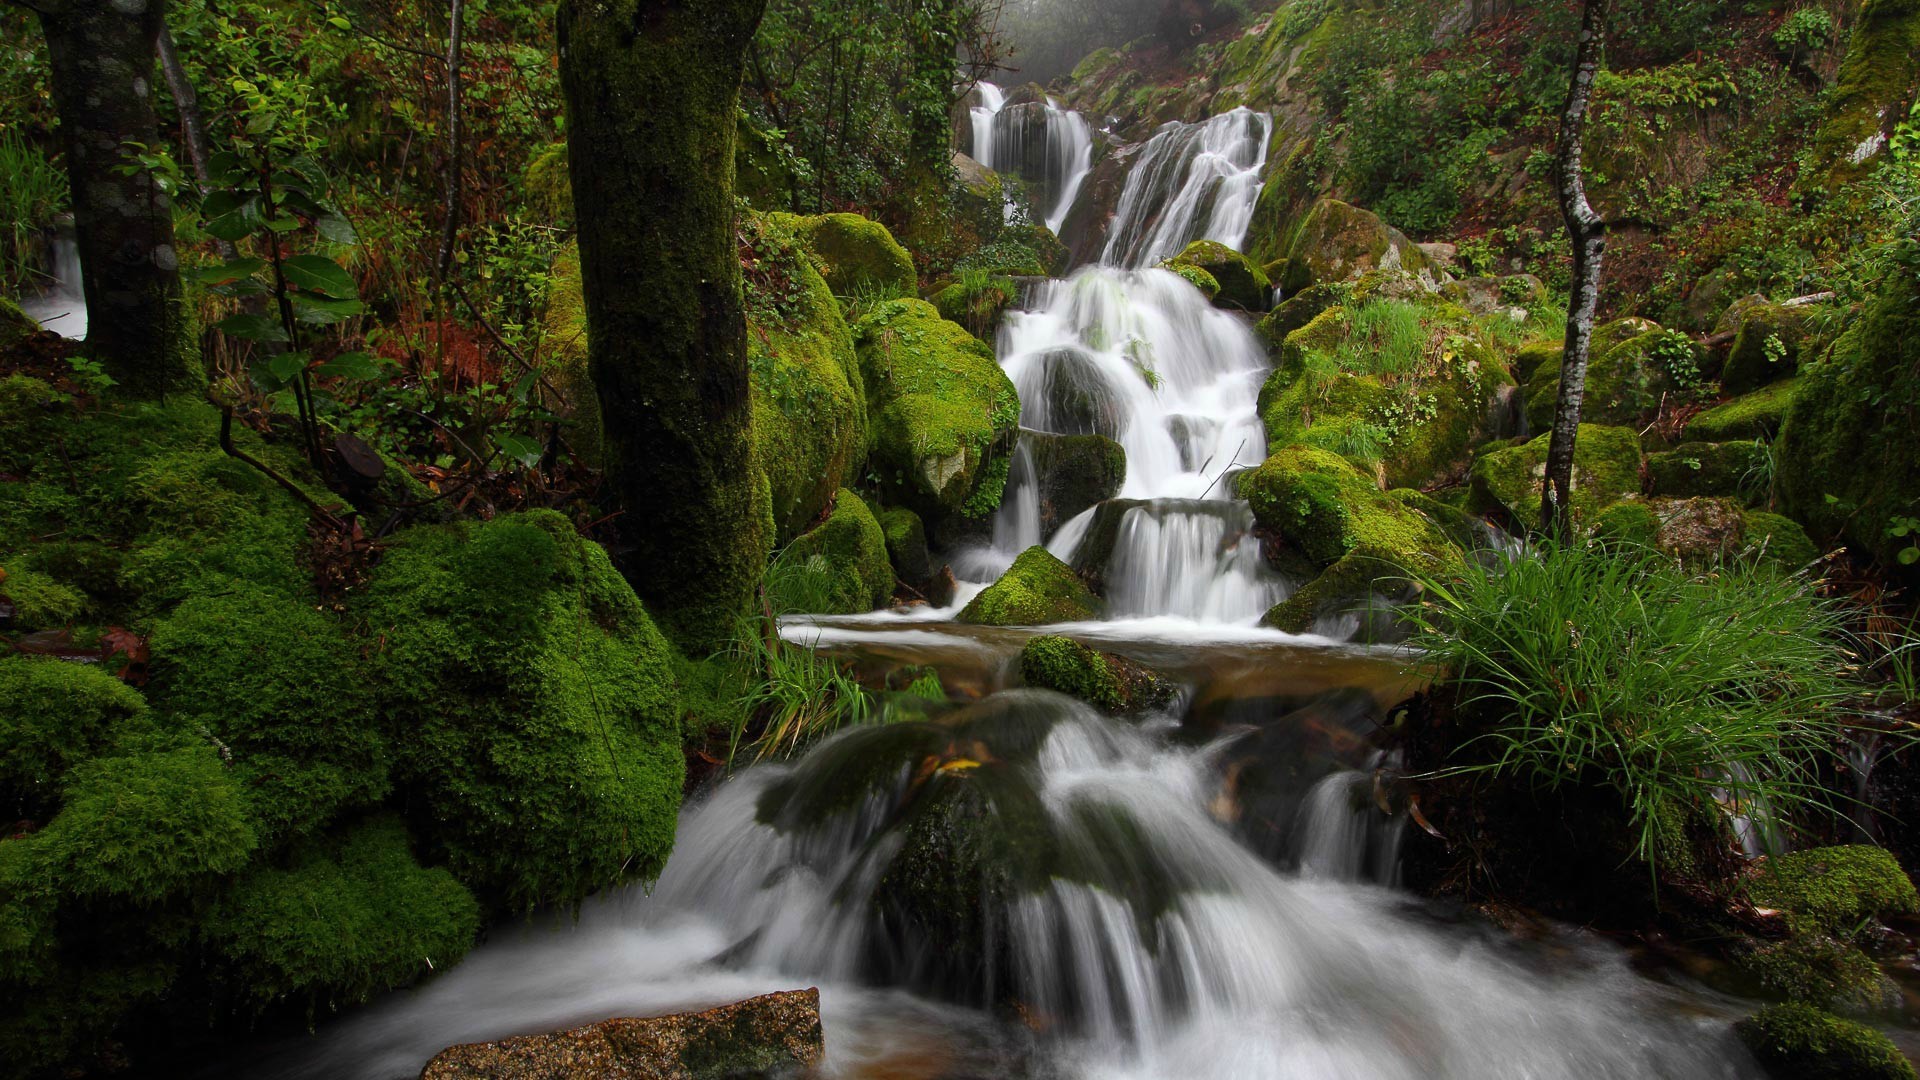 General 1920x1080 photography nature waterfall moss rocks stones creeks long exposure water trees plants